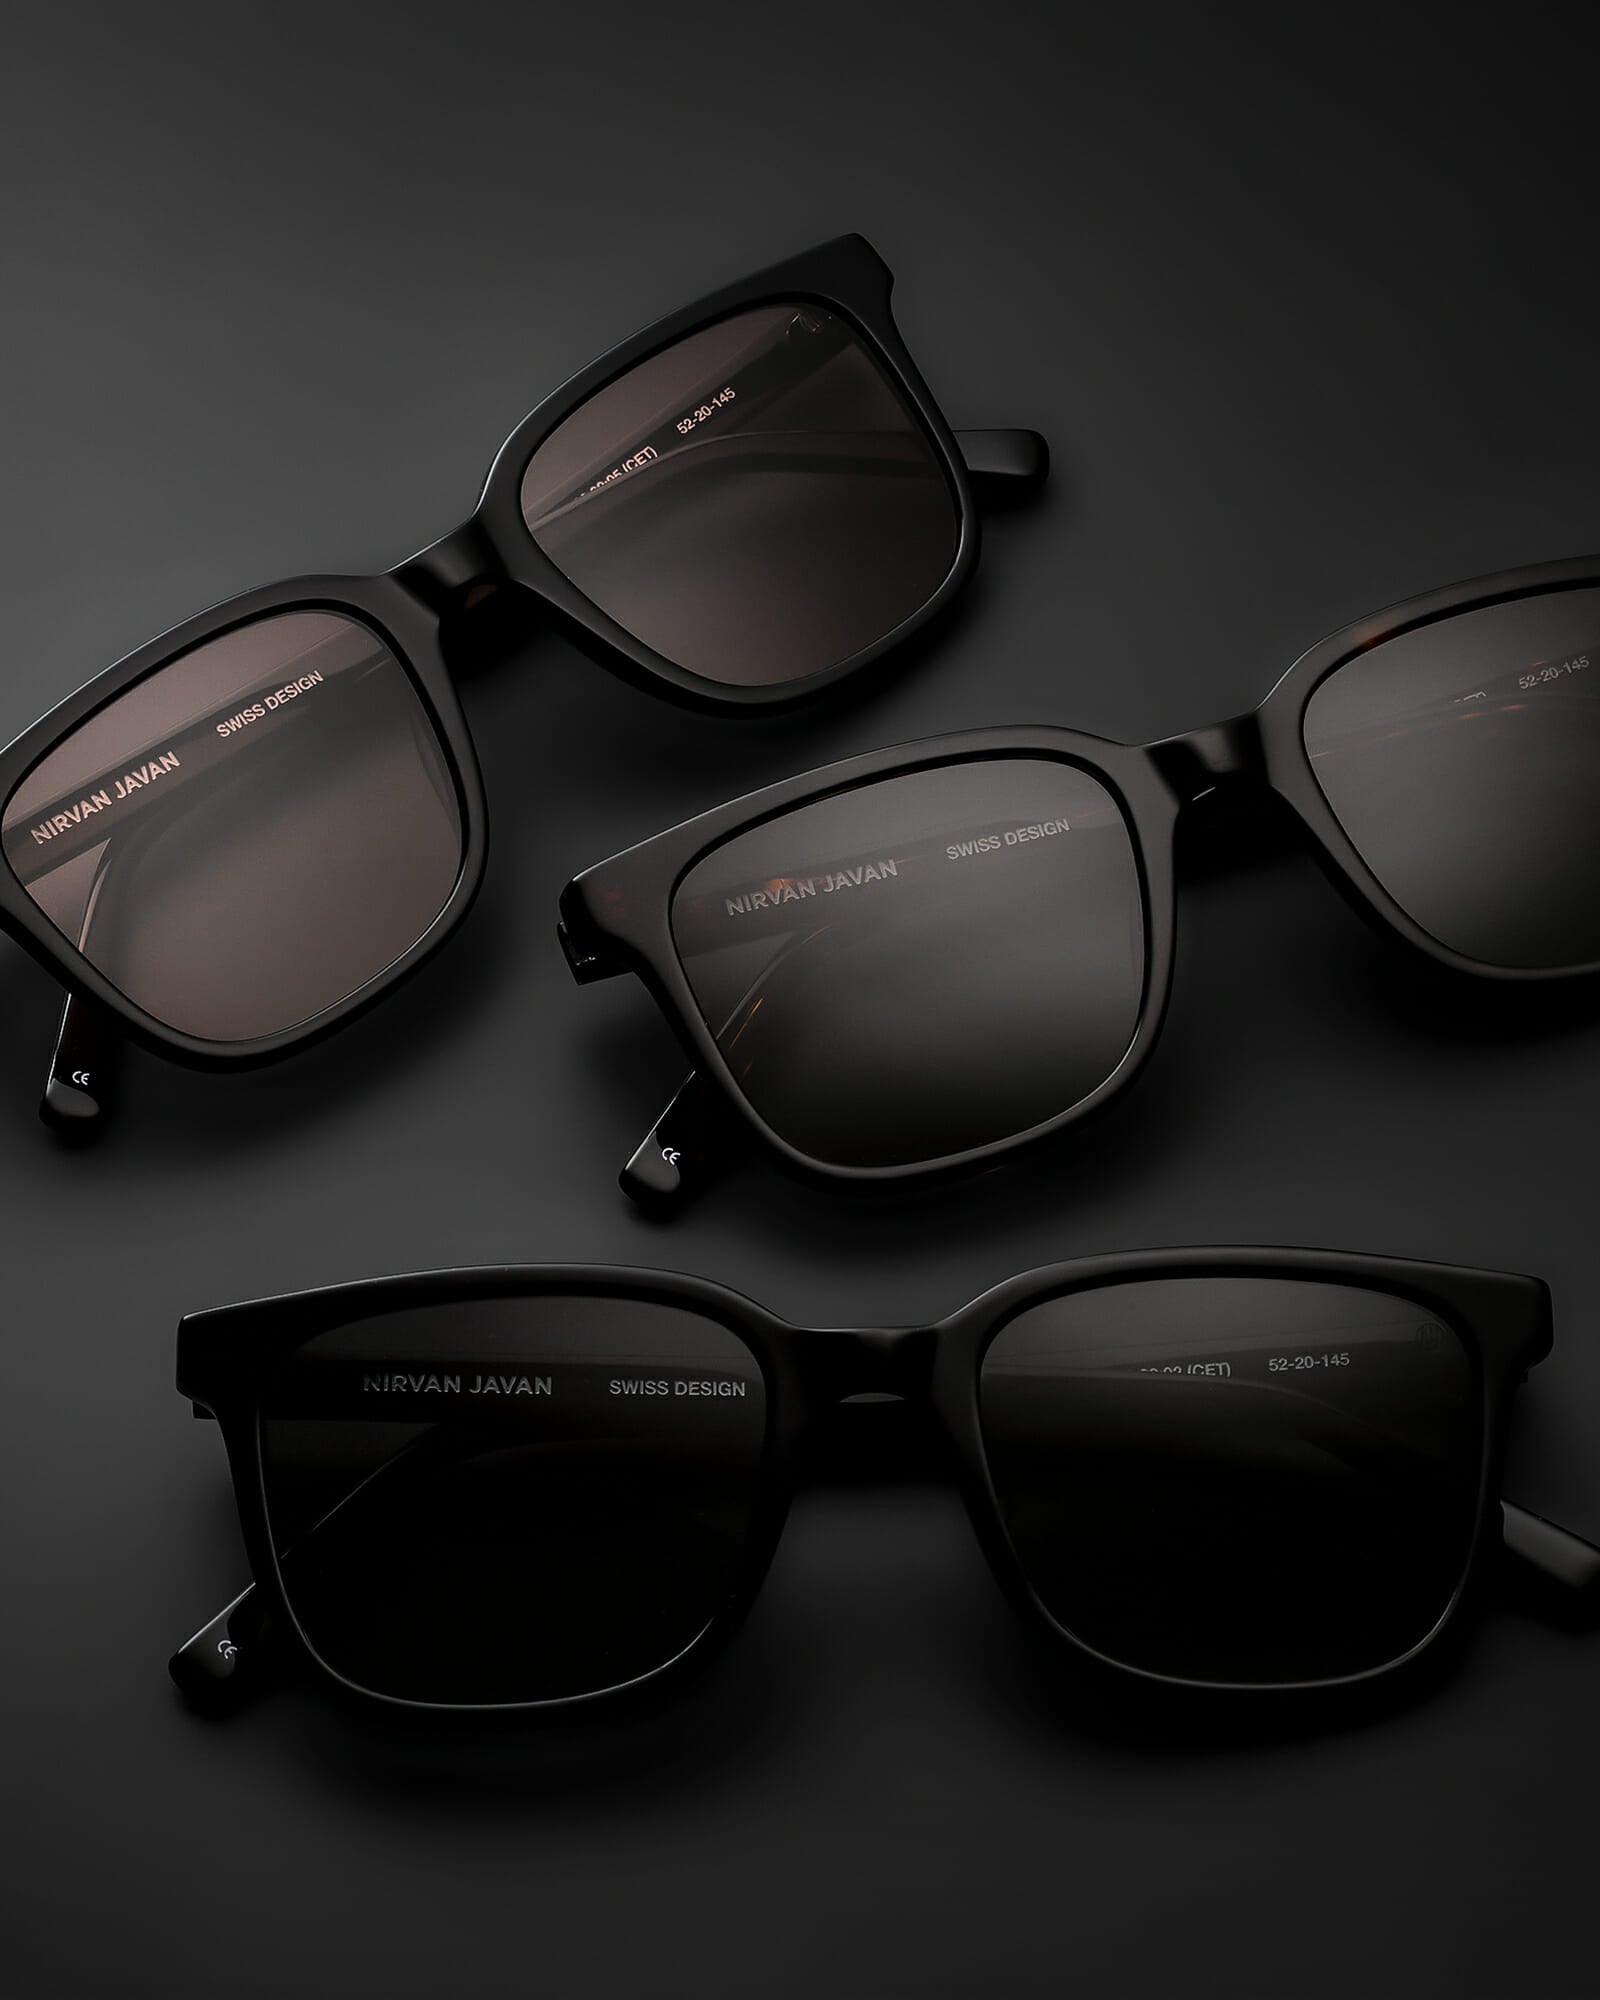 Three acetat shades on a black background, the frames are folded